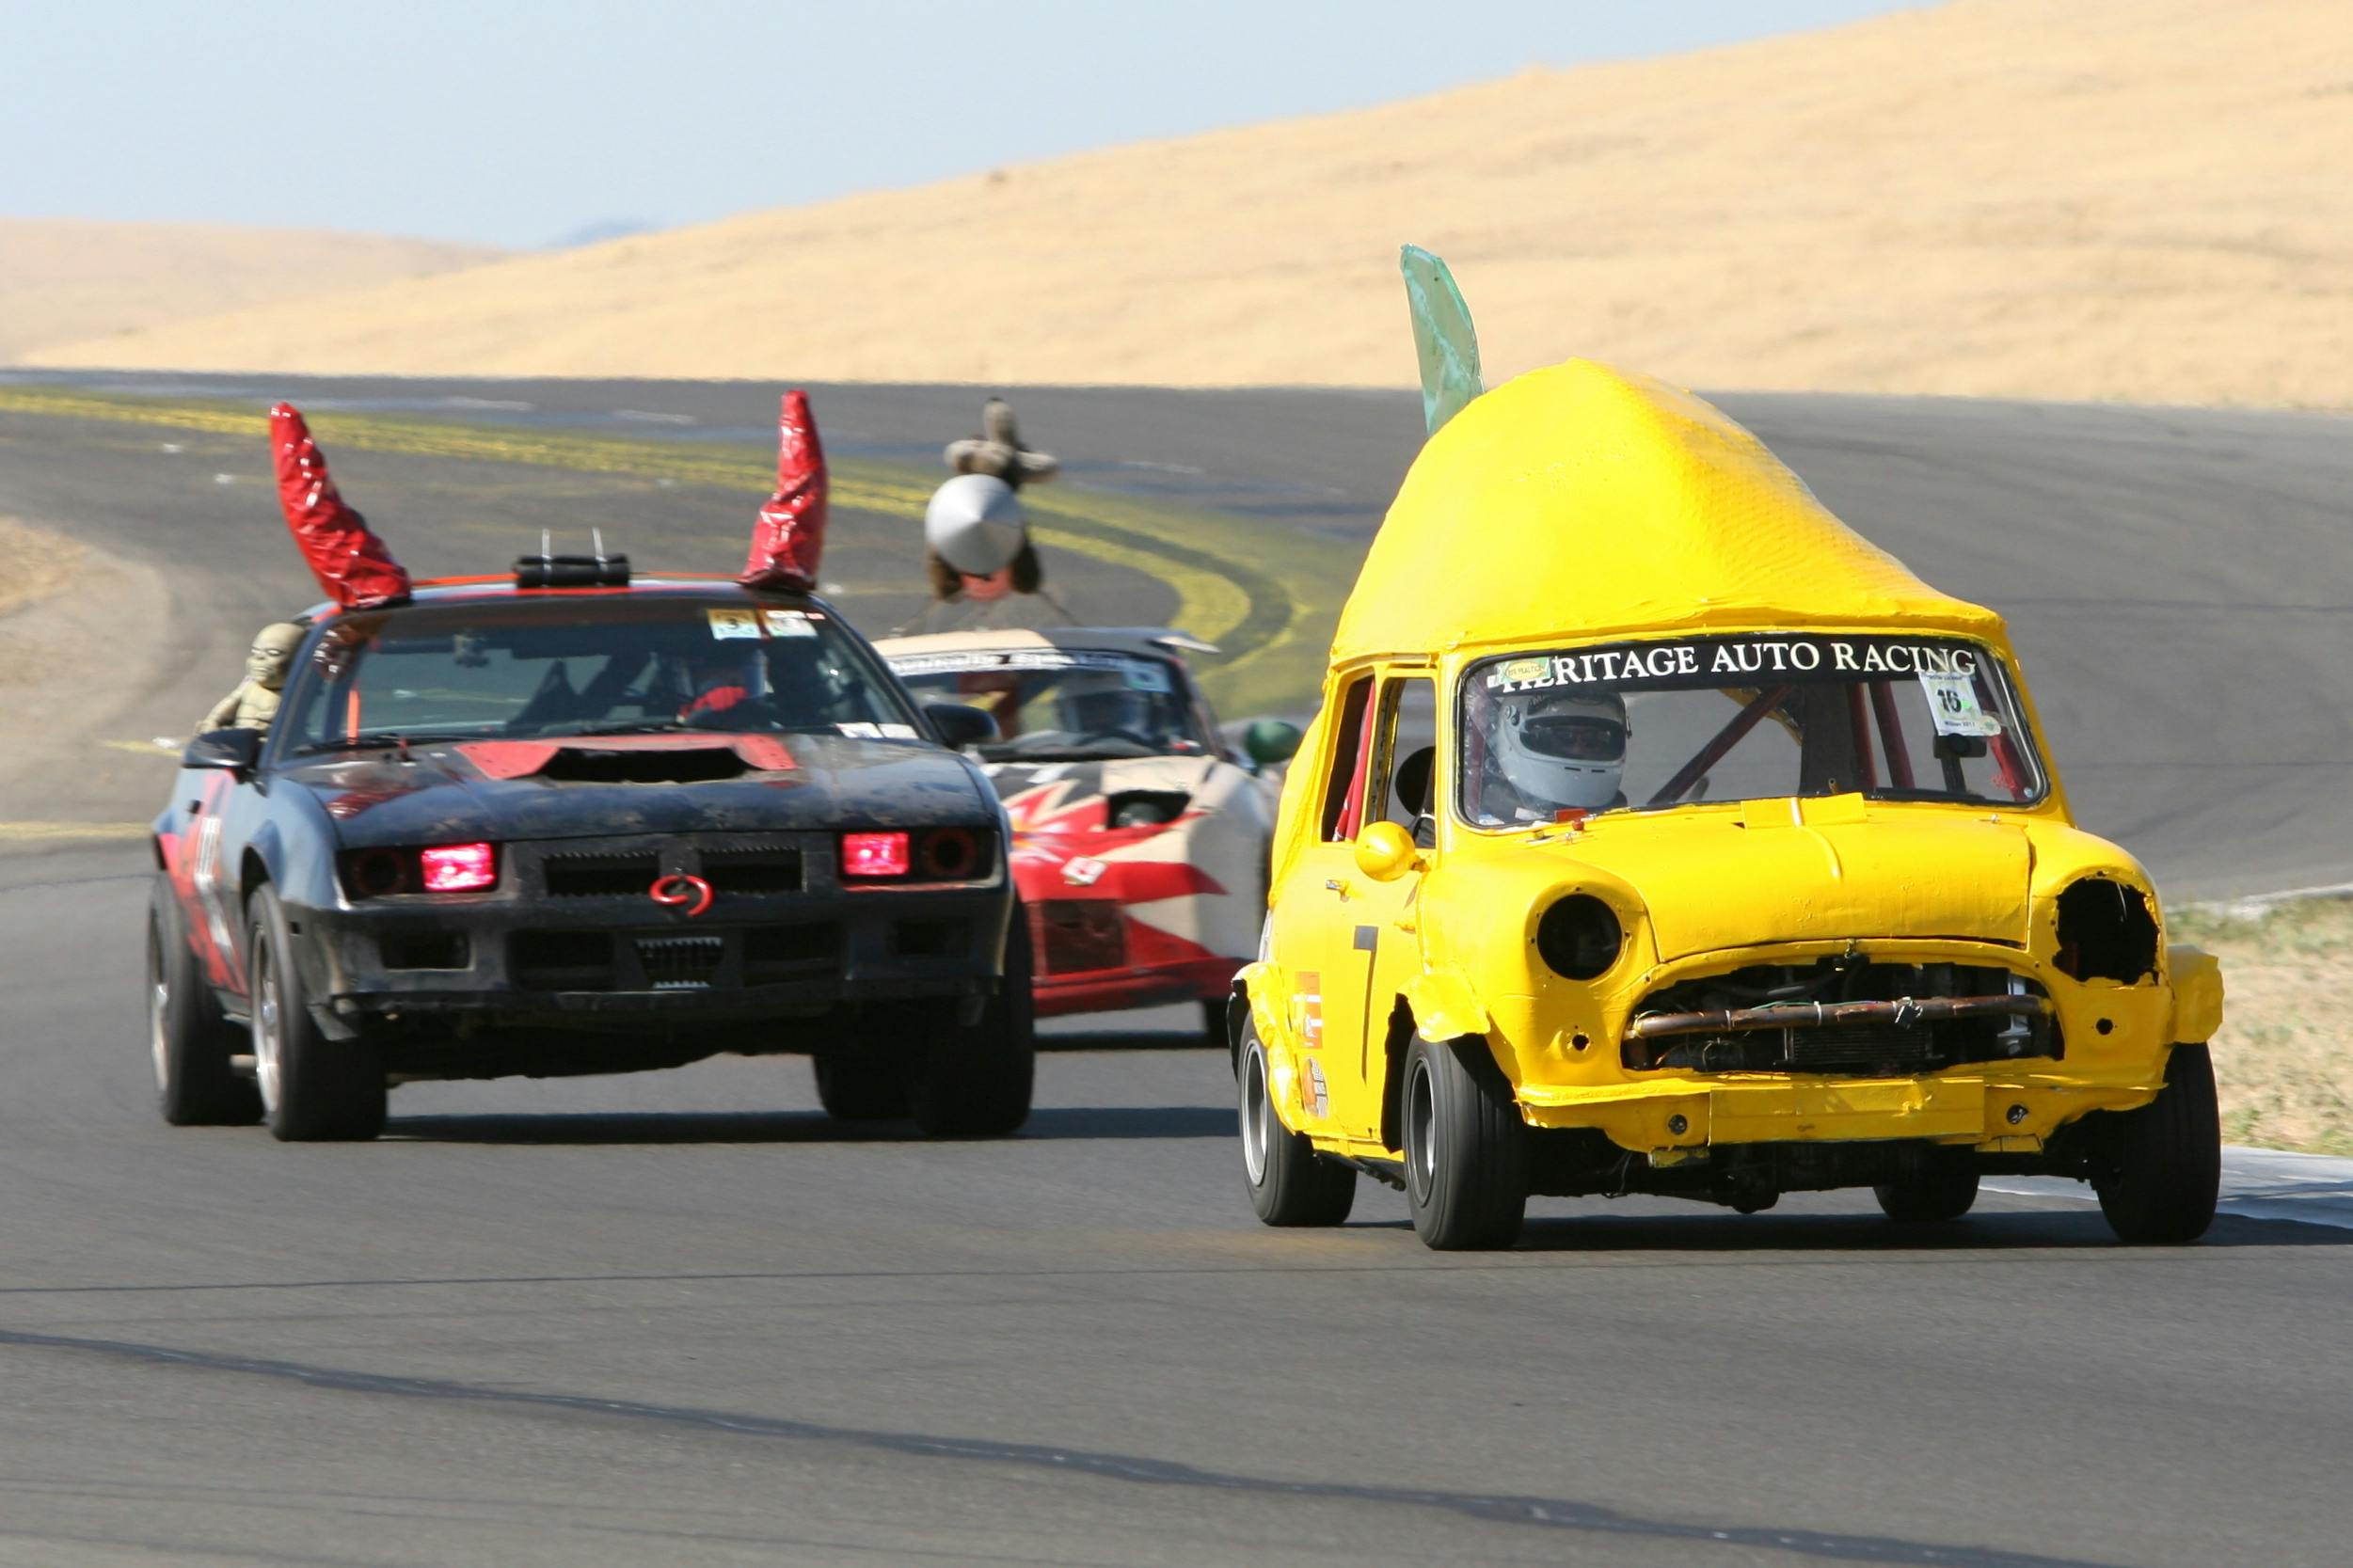 Novelty lemon and devil cars compete in the 24 Hours of Lemons race